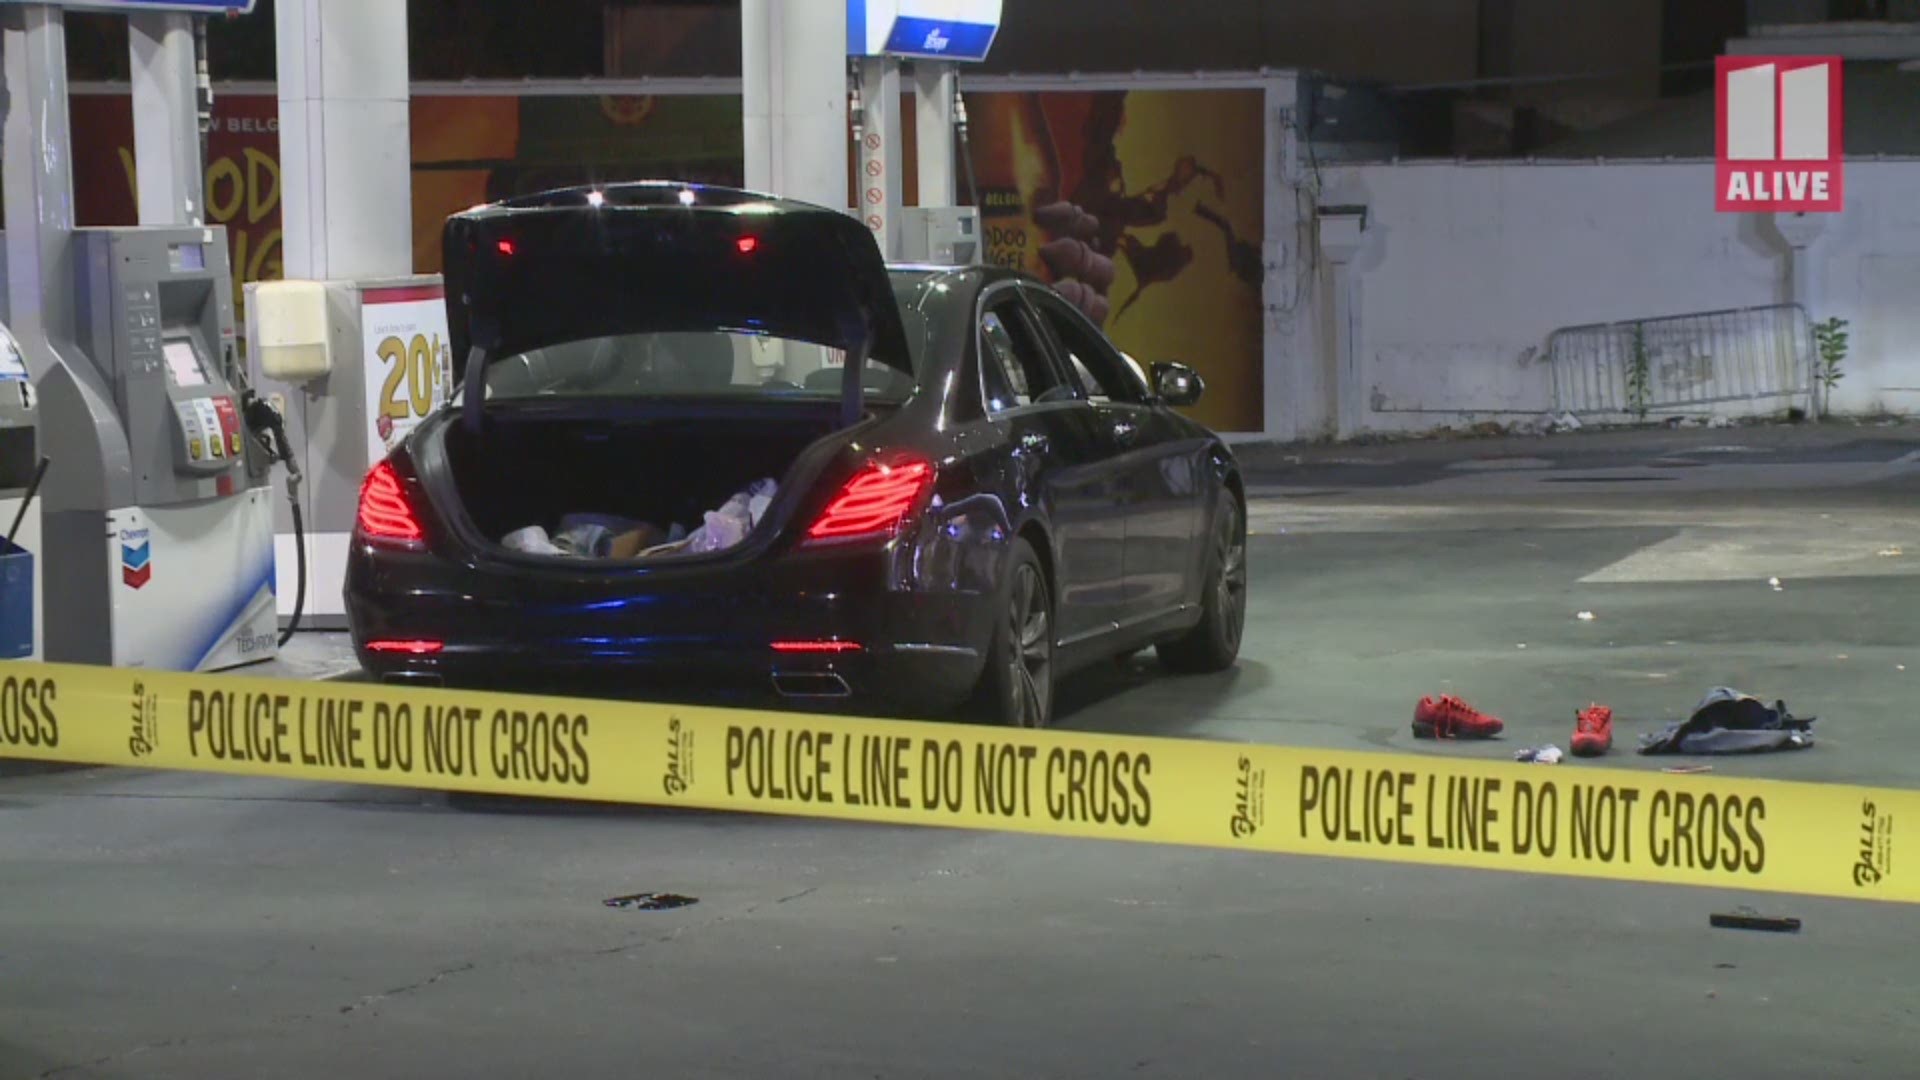 Atlanta Police said a would-be victim shot and killed an alleged robber at a gas station on 10th Street in midtown Atlanta early Sunday morning.